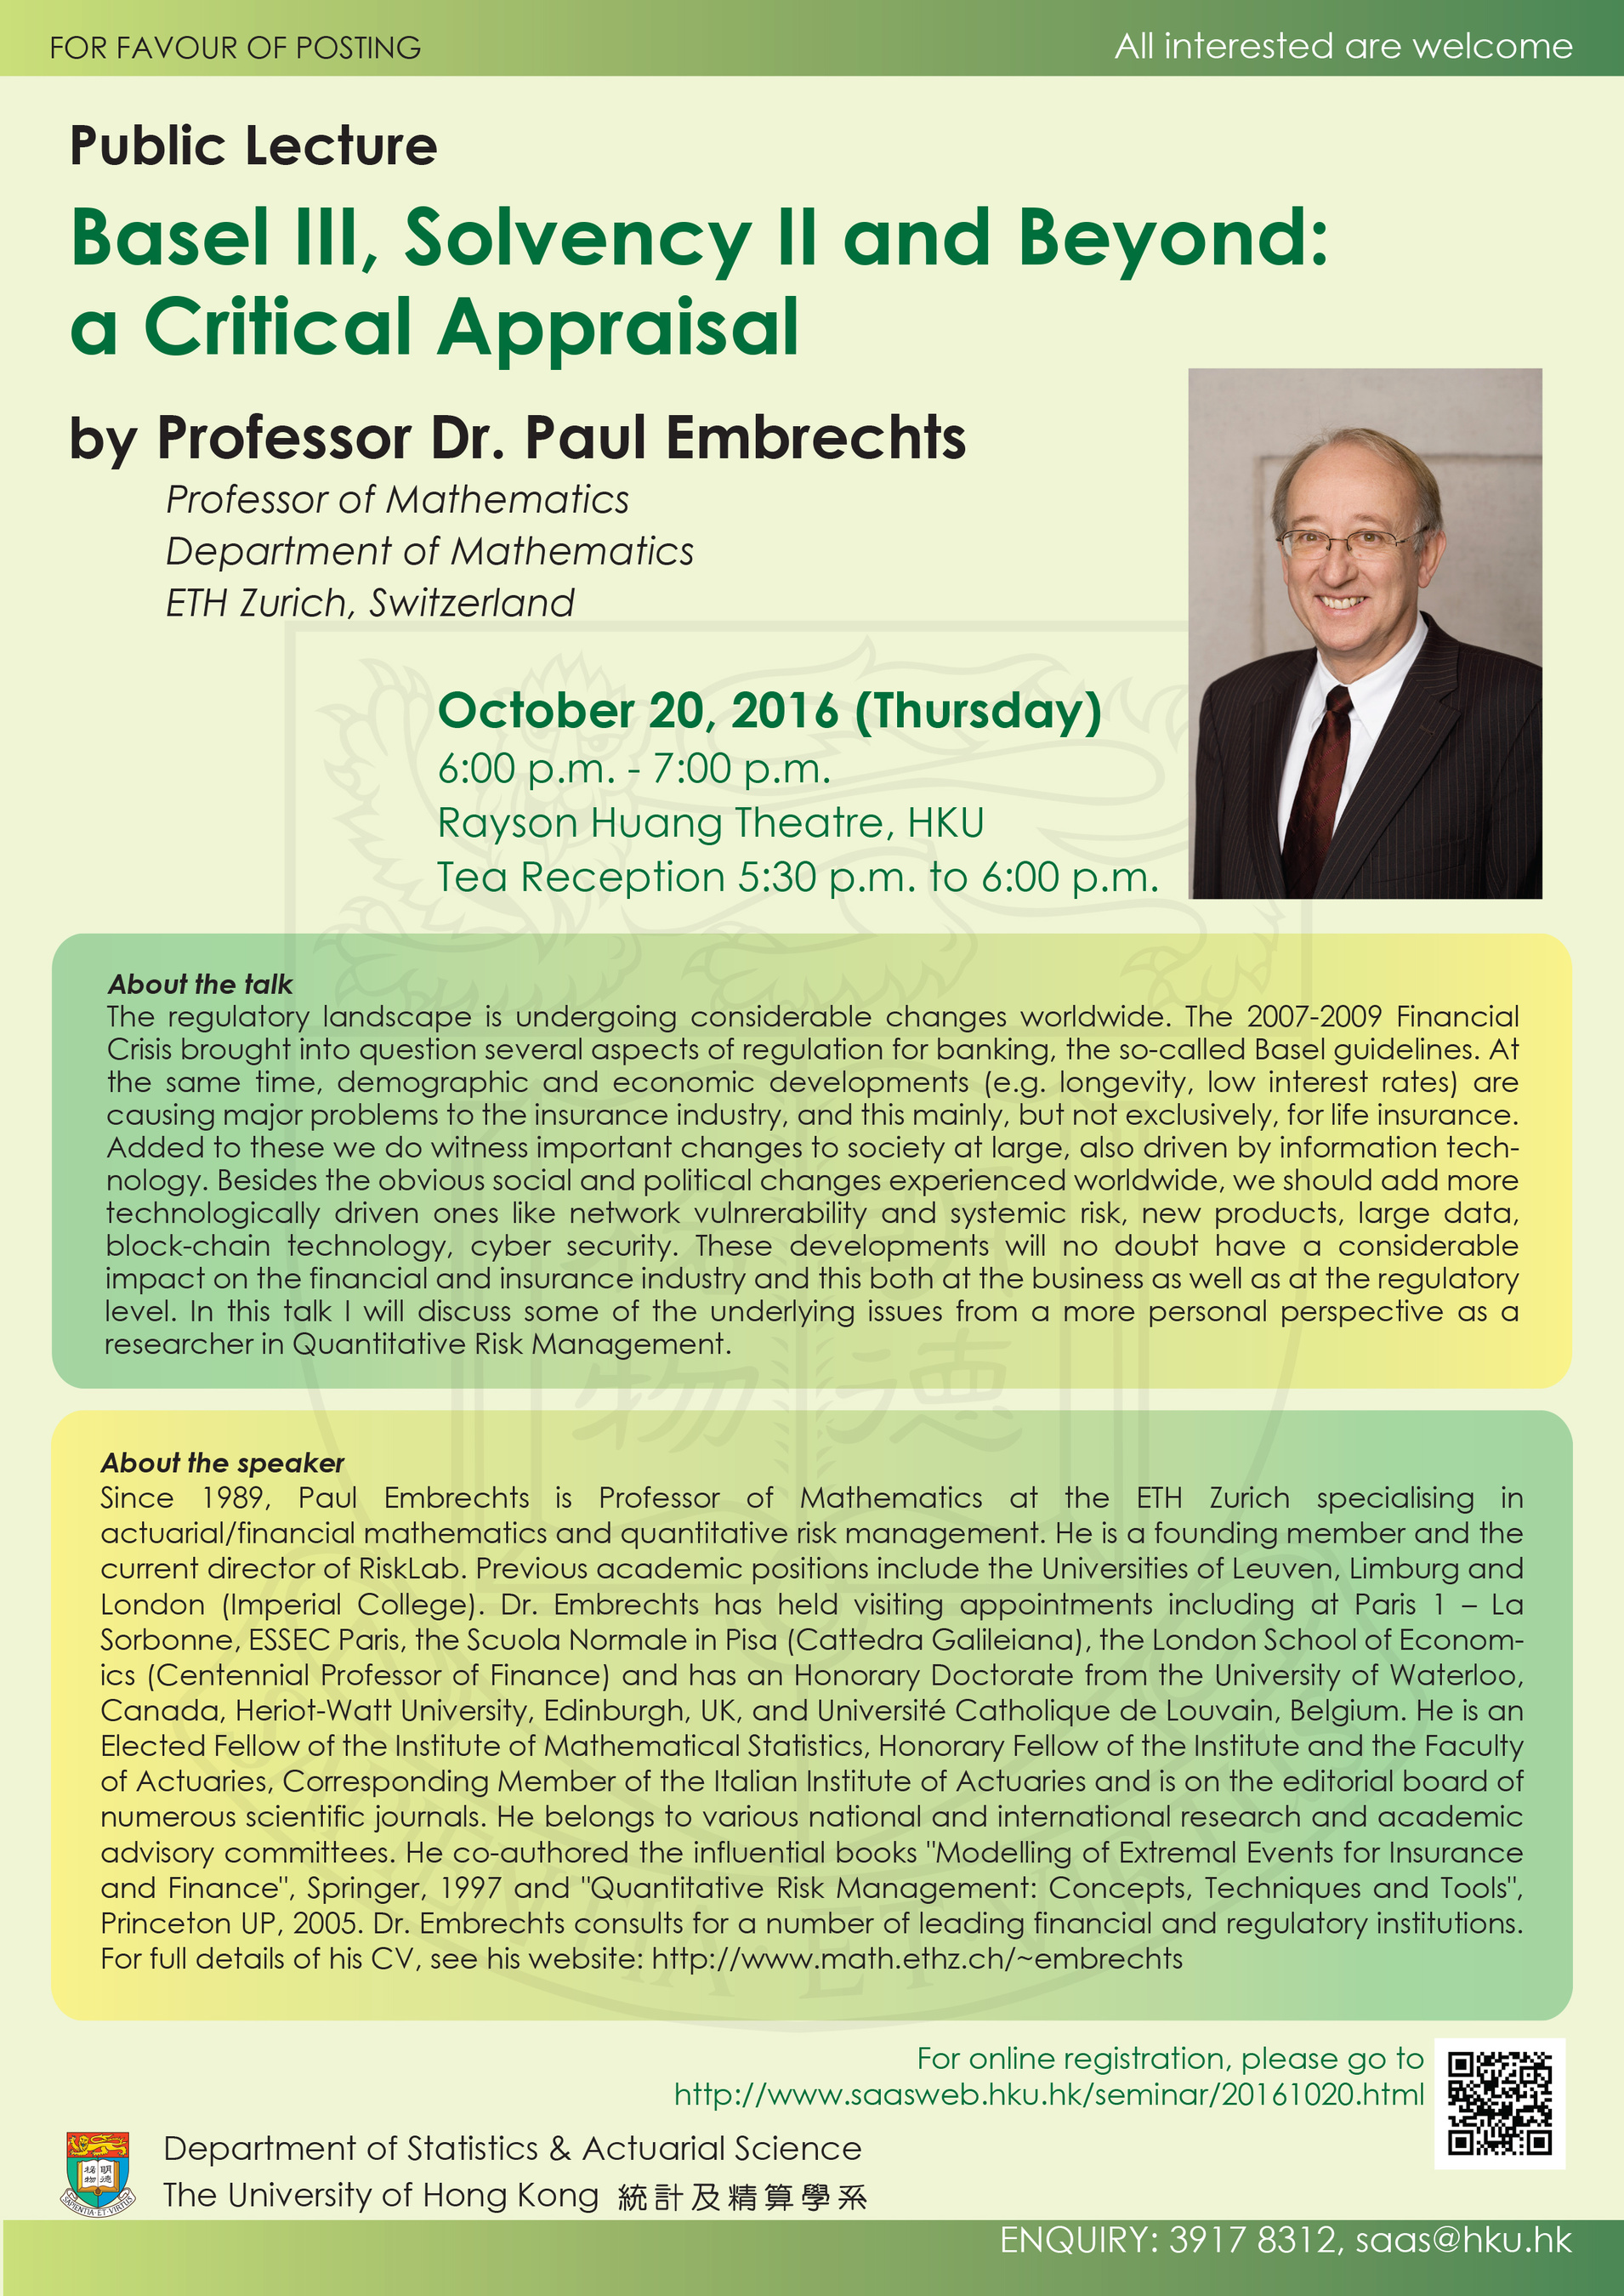 Public Lecture on 'Basel III, Solvency II and Beyond: a Critical Appraisal' by Professor Dr. Paul Embrechts on Thursday, October 20, 2016.